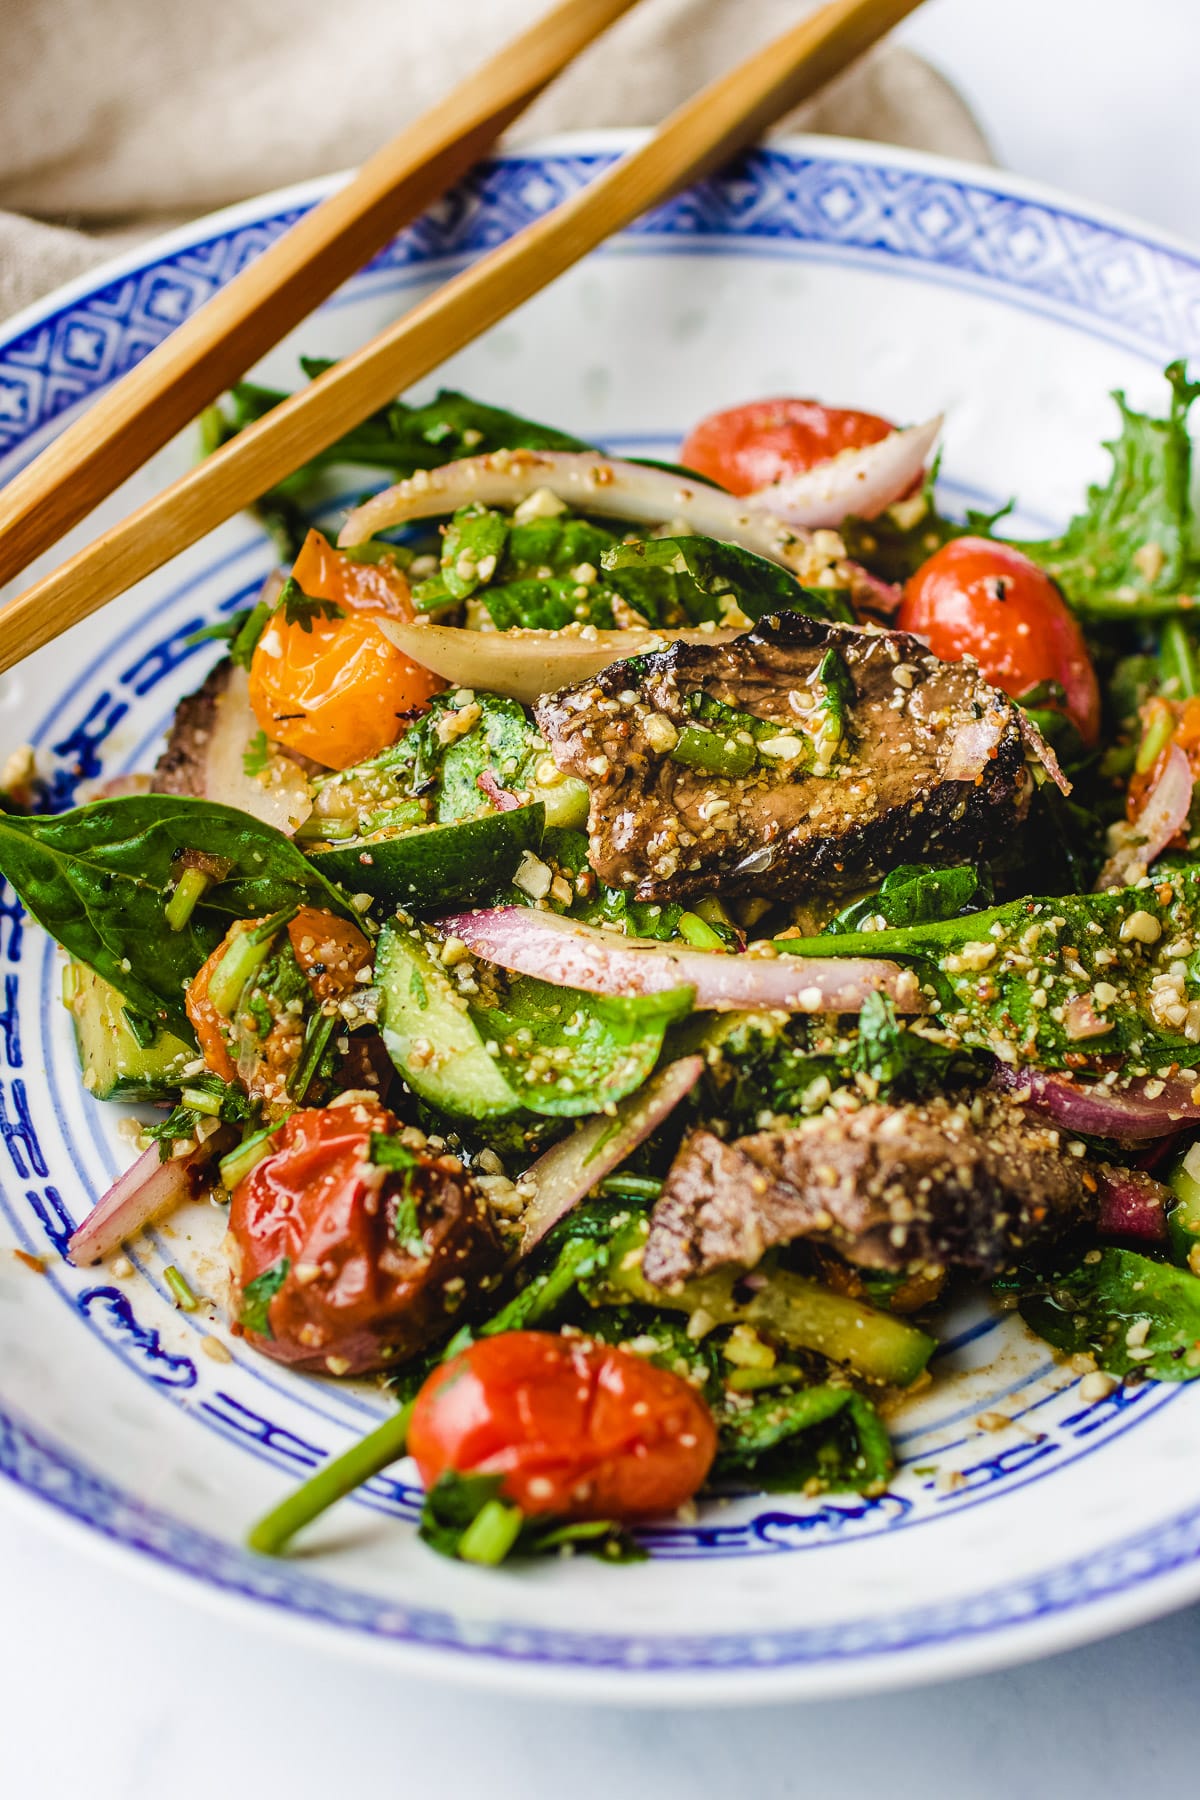 Grilled Thai style beef salad with Thai chili sauce dressing made paleo, gluten-free, low carb, and Whole30 from I Heart Umami.